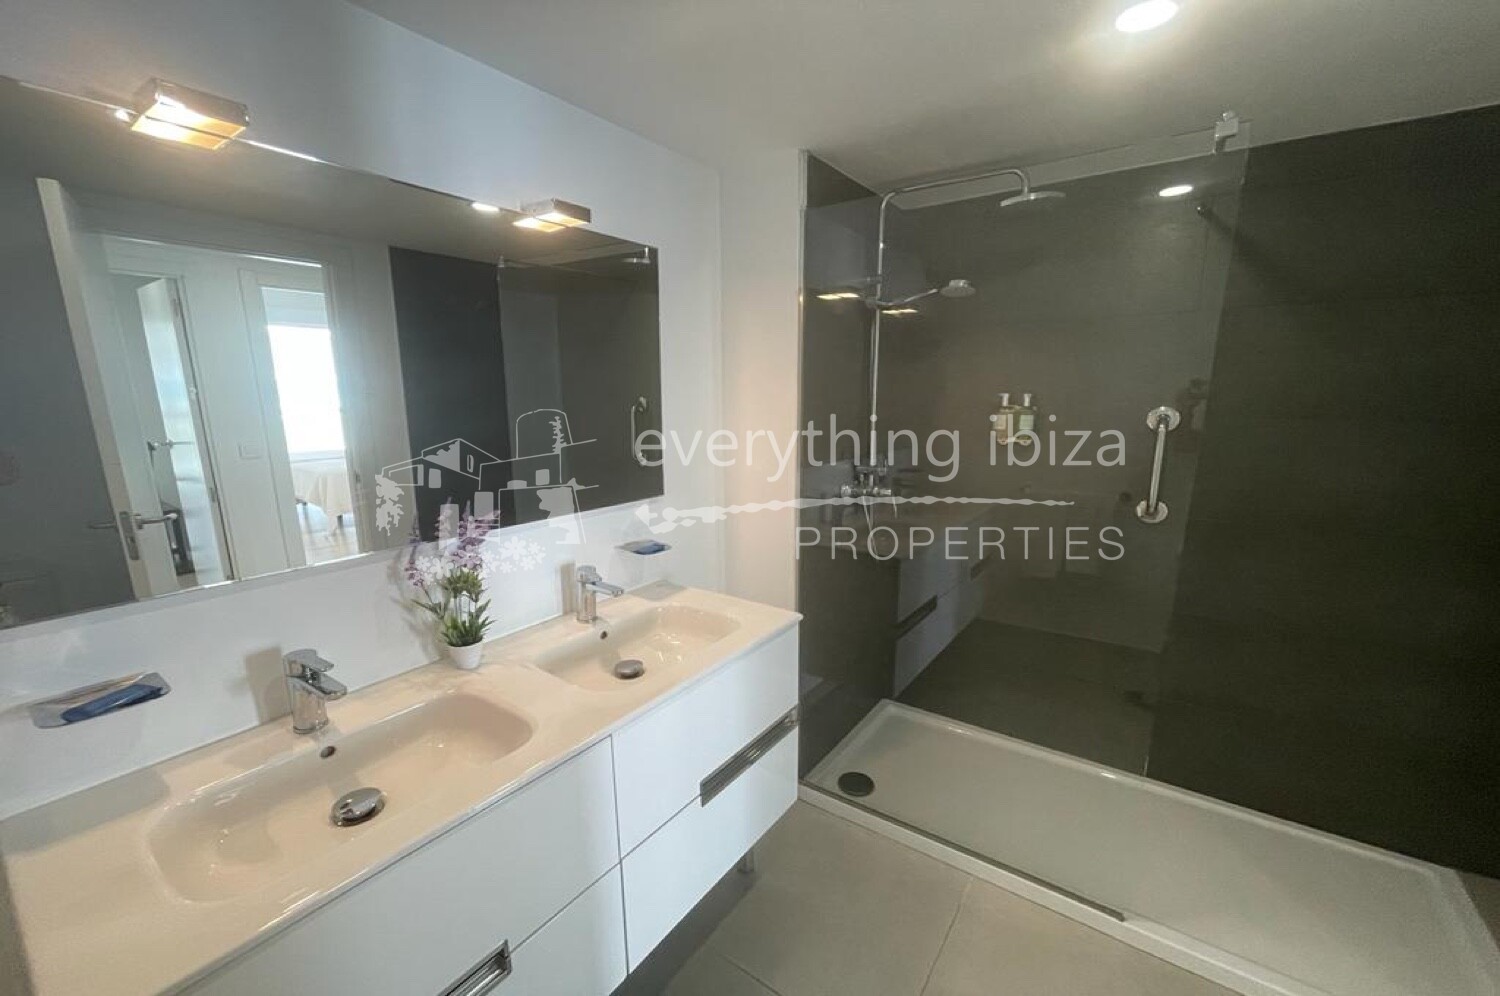 3 Bed Modern Frontline Apartment with Sea Views, ref. 1456, for sale in Ibiza by everything ibiza Properties